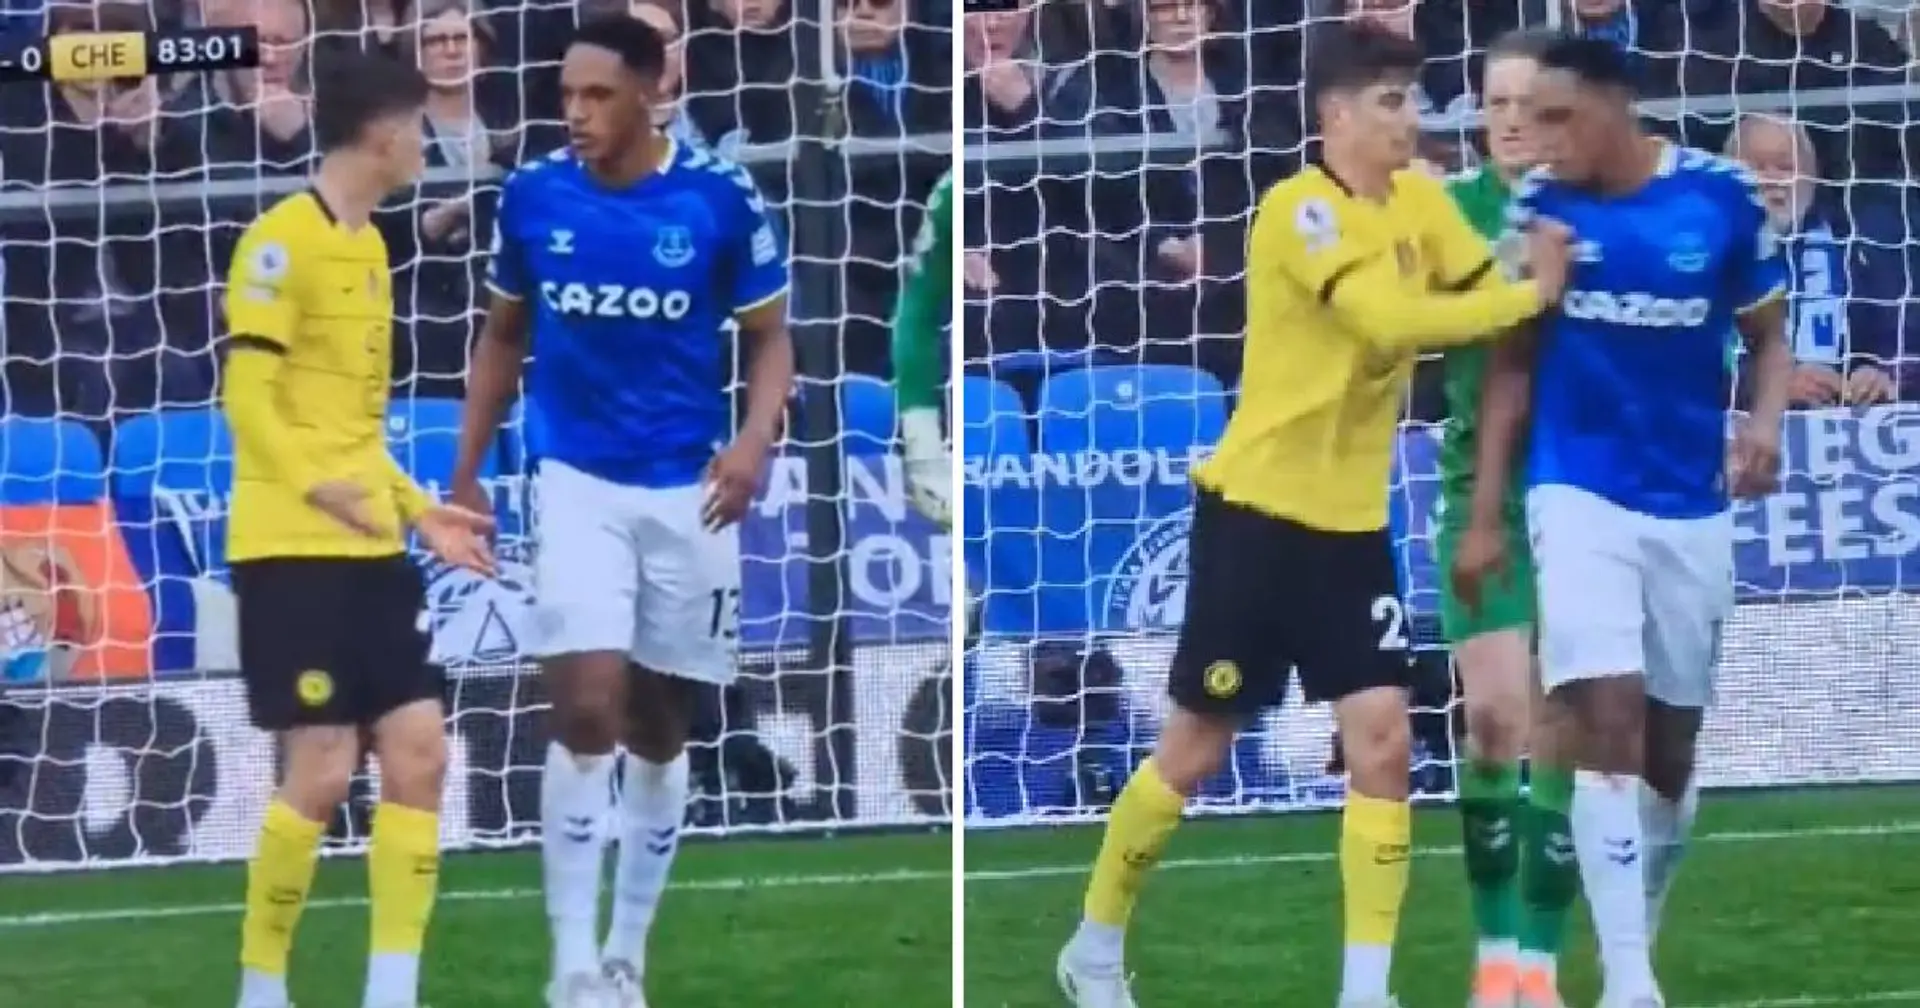 Spotted: Frustrated Havertz pushes Yerry Mina to receive yellow card in Everton defeat